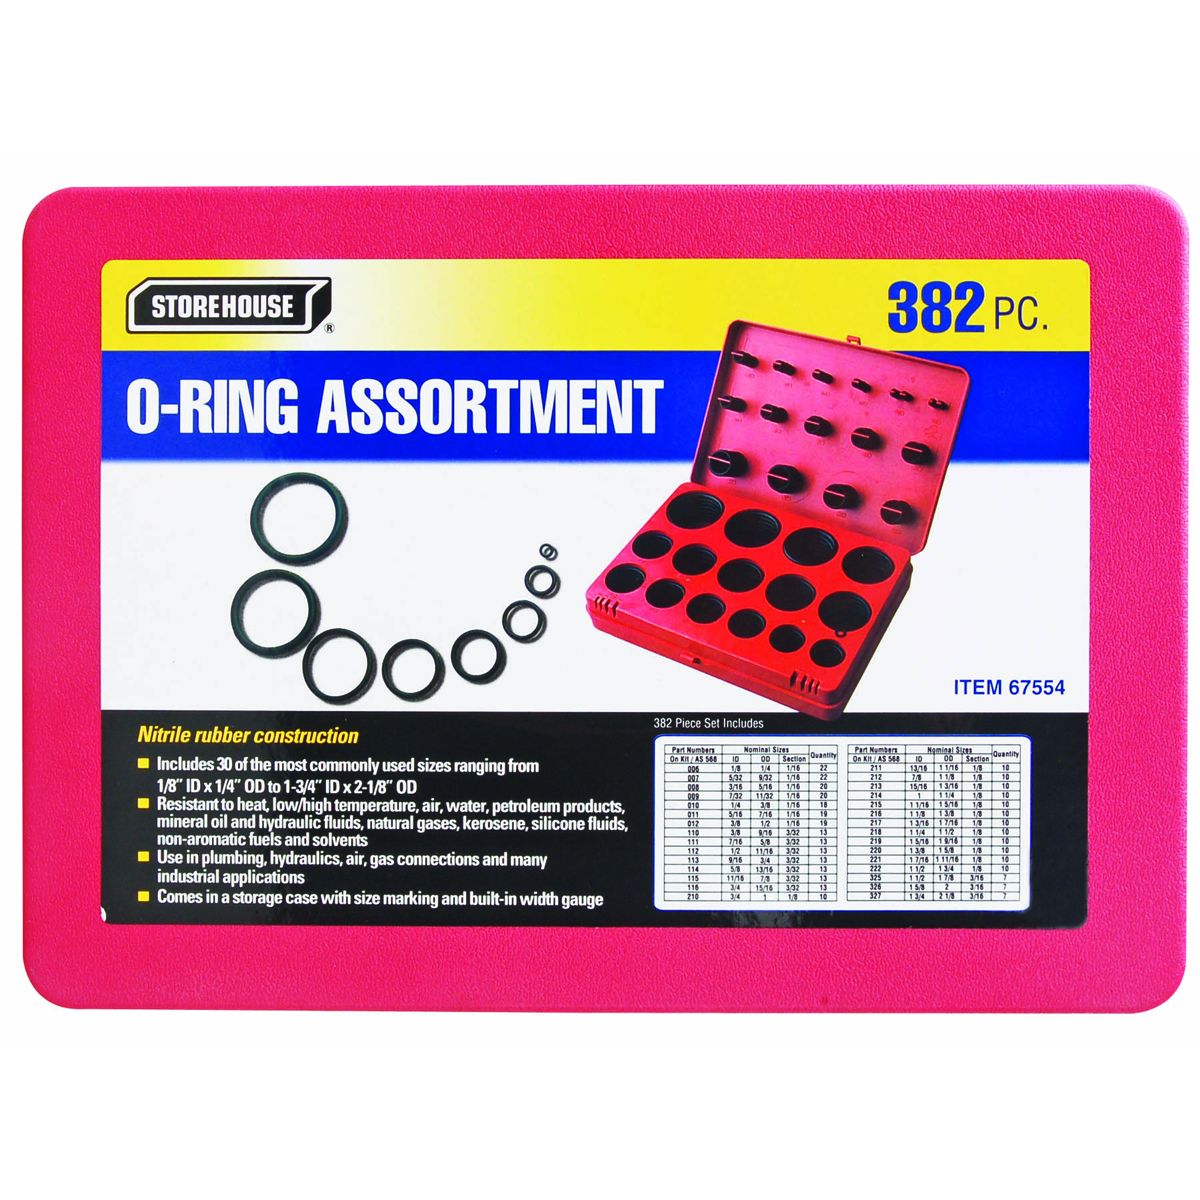 STOREHOUSE 382 Piece O-Ring Assortment